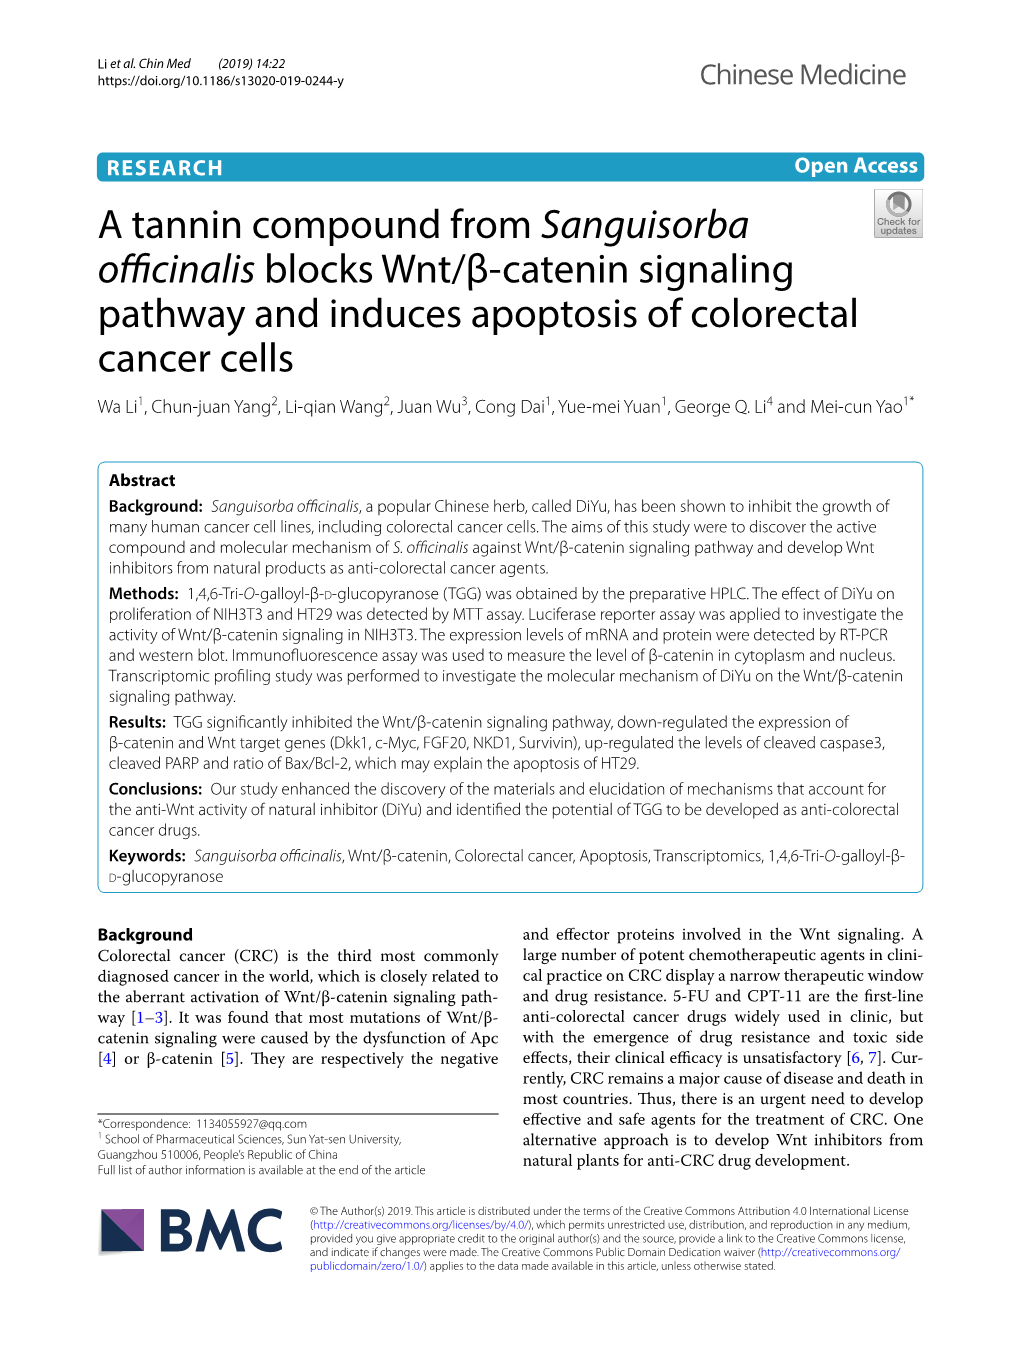 A Tannin Compound from Sanguisorba Officinalis Blocks Wnt/Β-Catenin